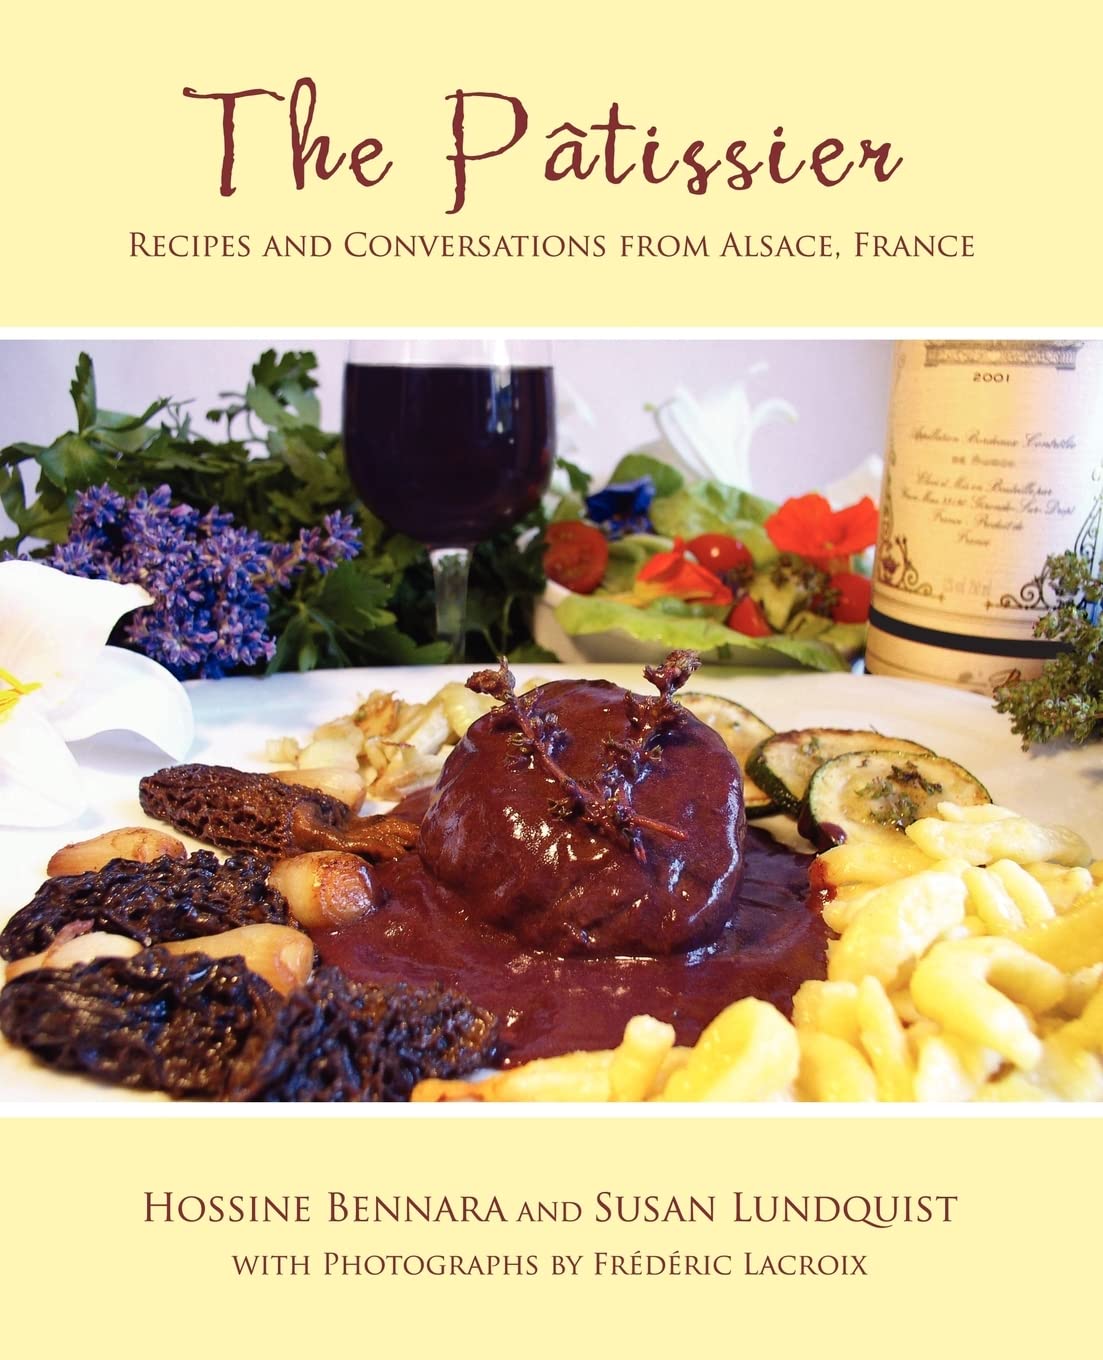 The Pýtissier: Recipes and Conversations from Alsace, France